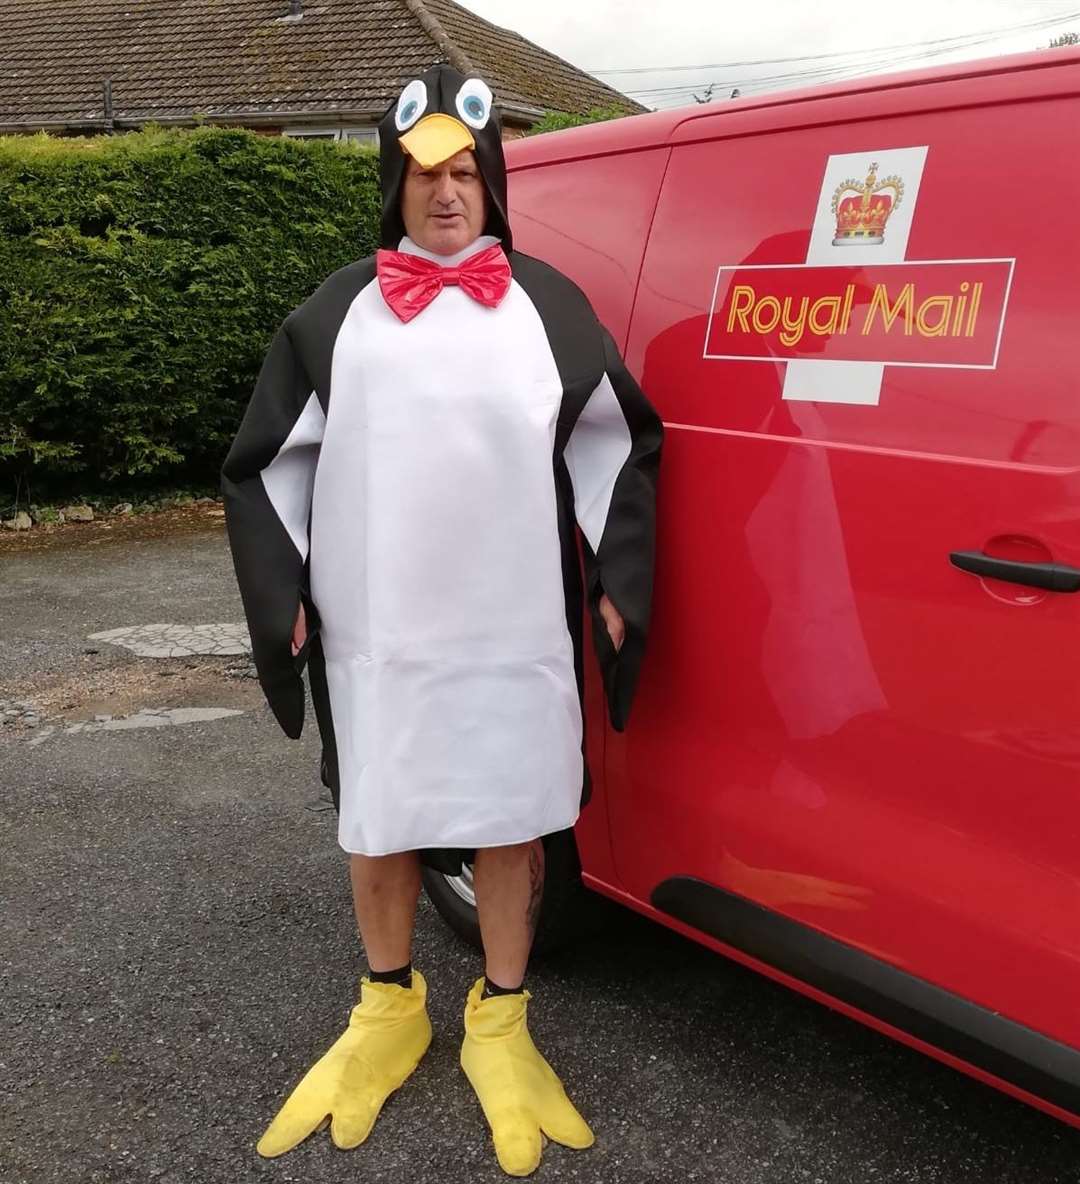 Gary Waller waddled his way through one round dressed as a penguin